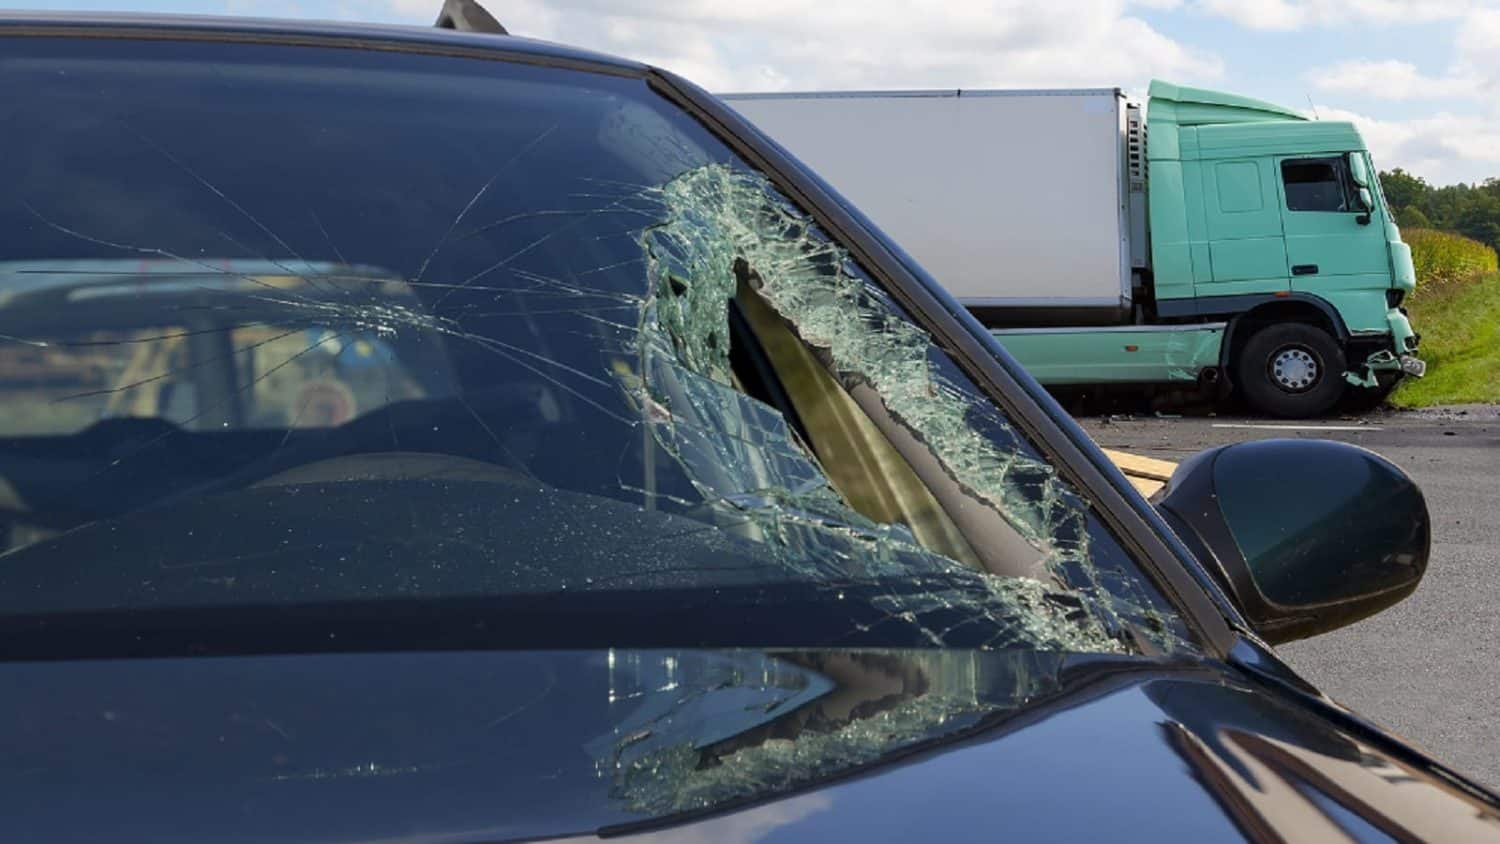 View of truck in an accident with car, broken glass